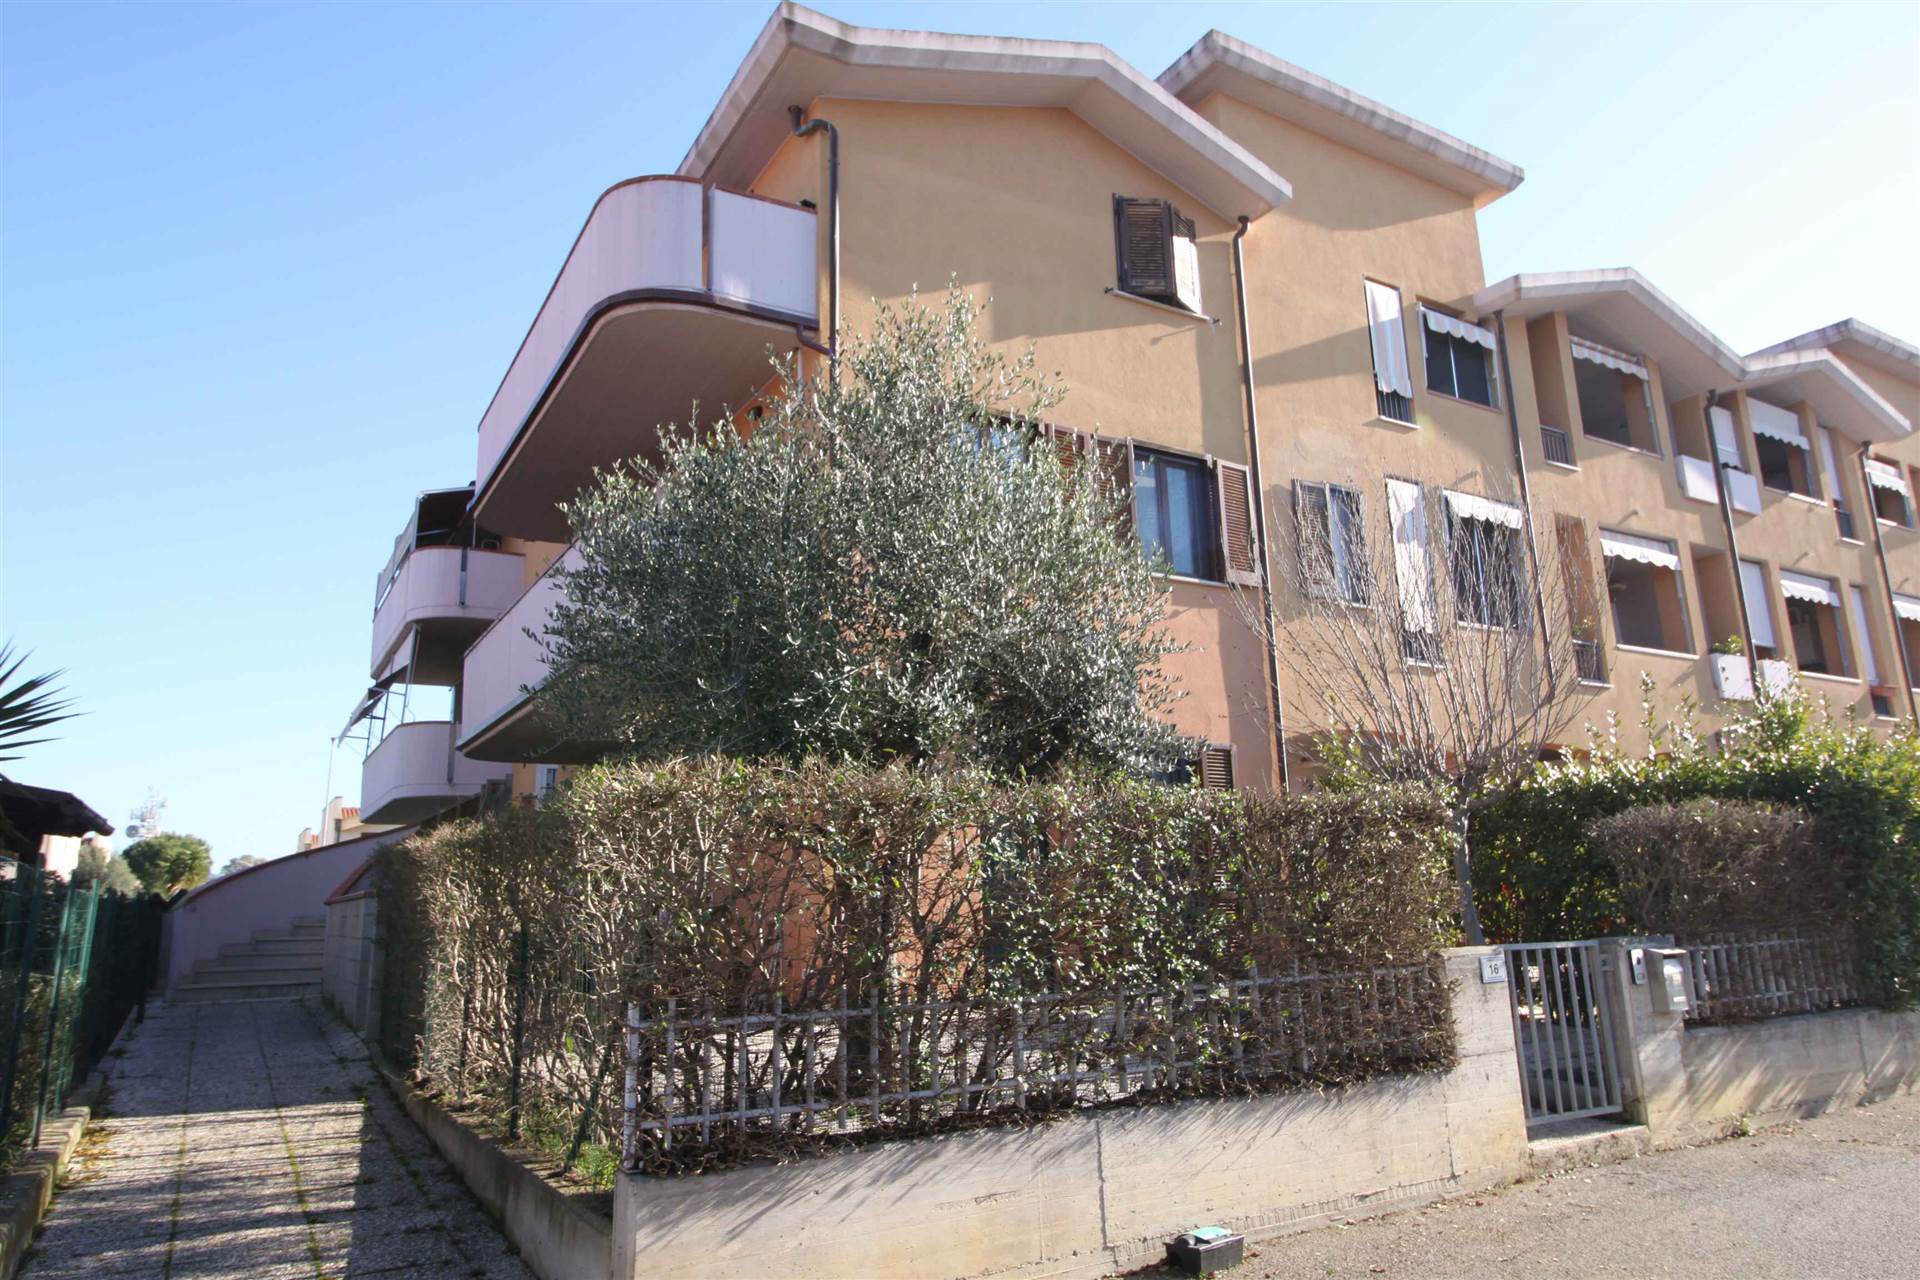 PIZZETTI, GROSSETO, Detached apartment for sale of 49 Sq. mt., Excellent Condition, Heating Individual heating system, Energetic class: G, placed at 